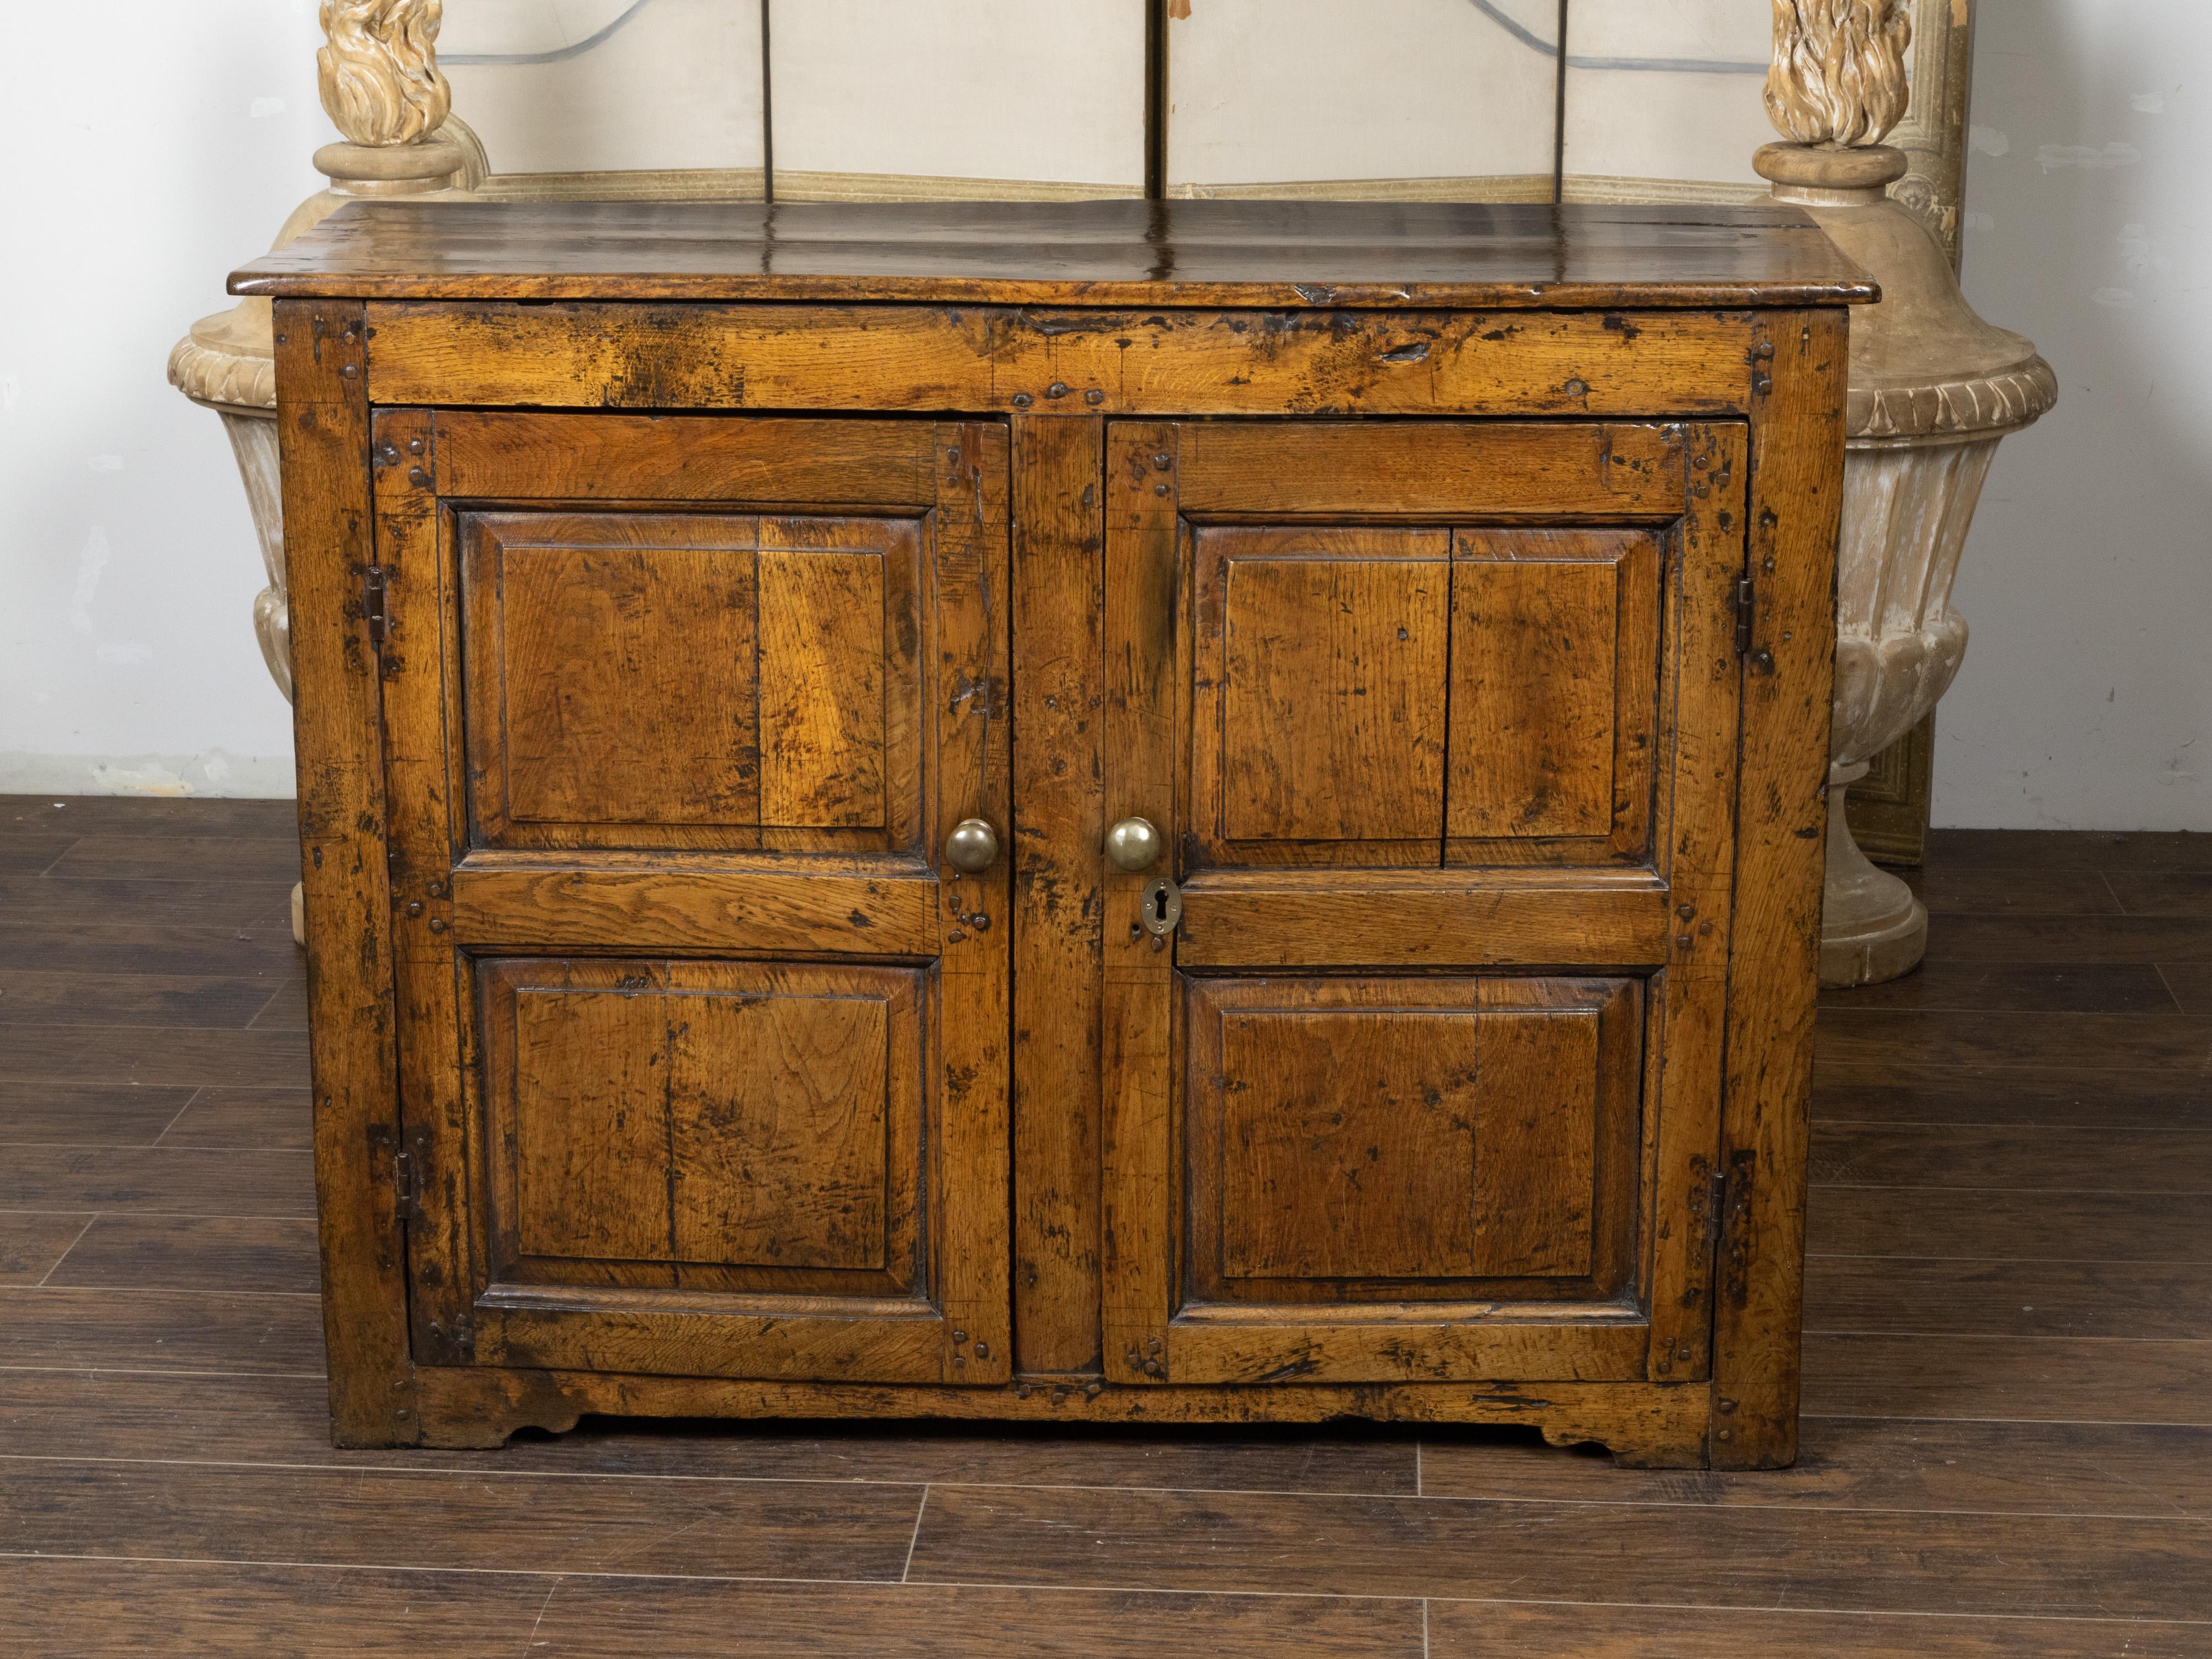 An English early oak cupboard from the 18th century, with rustic appearance, two doors, carved panels and distressed patina. Created in England during the 18th century, this oak cupboard charms us with its country flair and simple lines. The